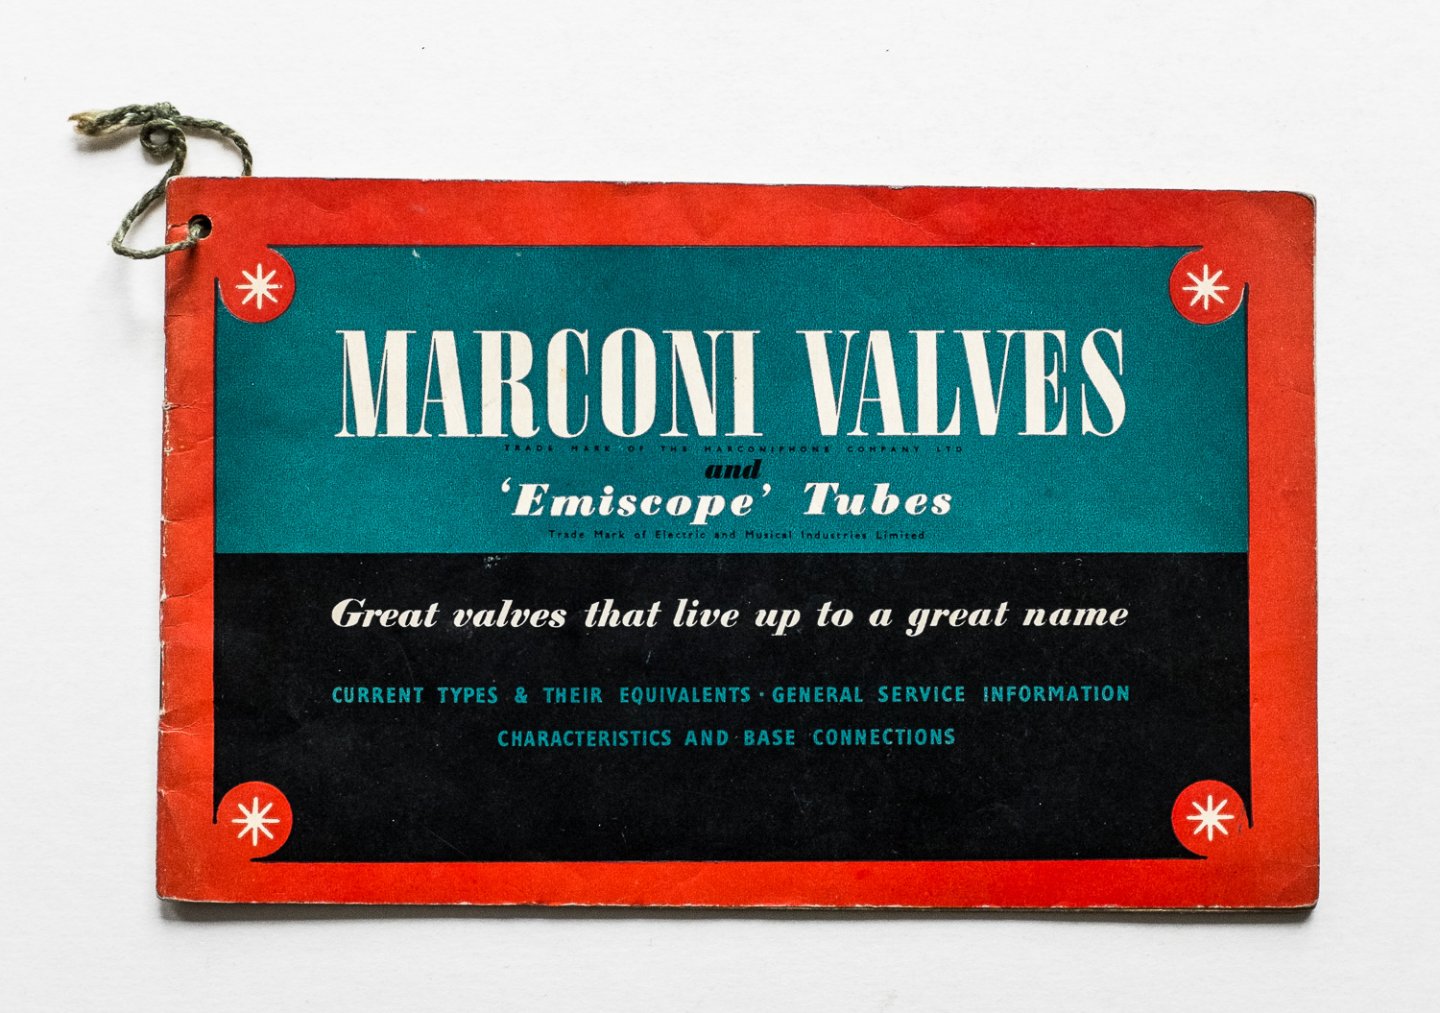  - Marconi Valves and "Emiscope" tubes - Great valves that live up to a great name